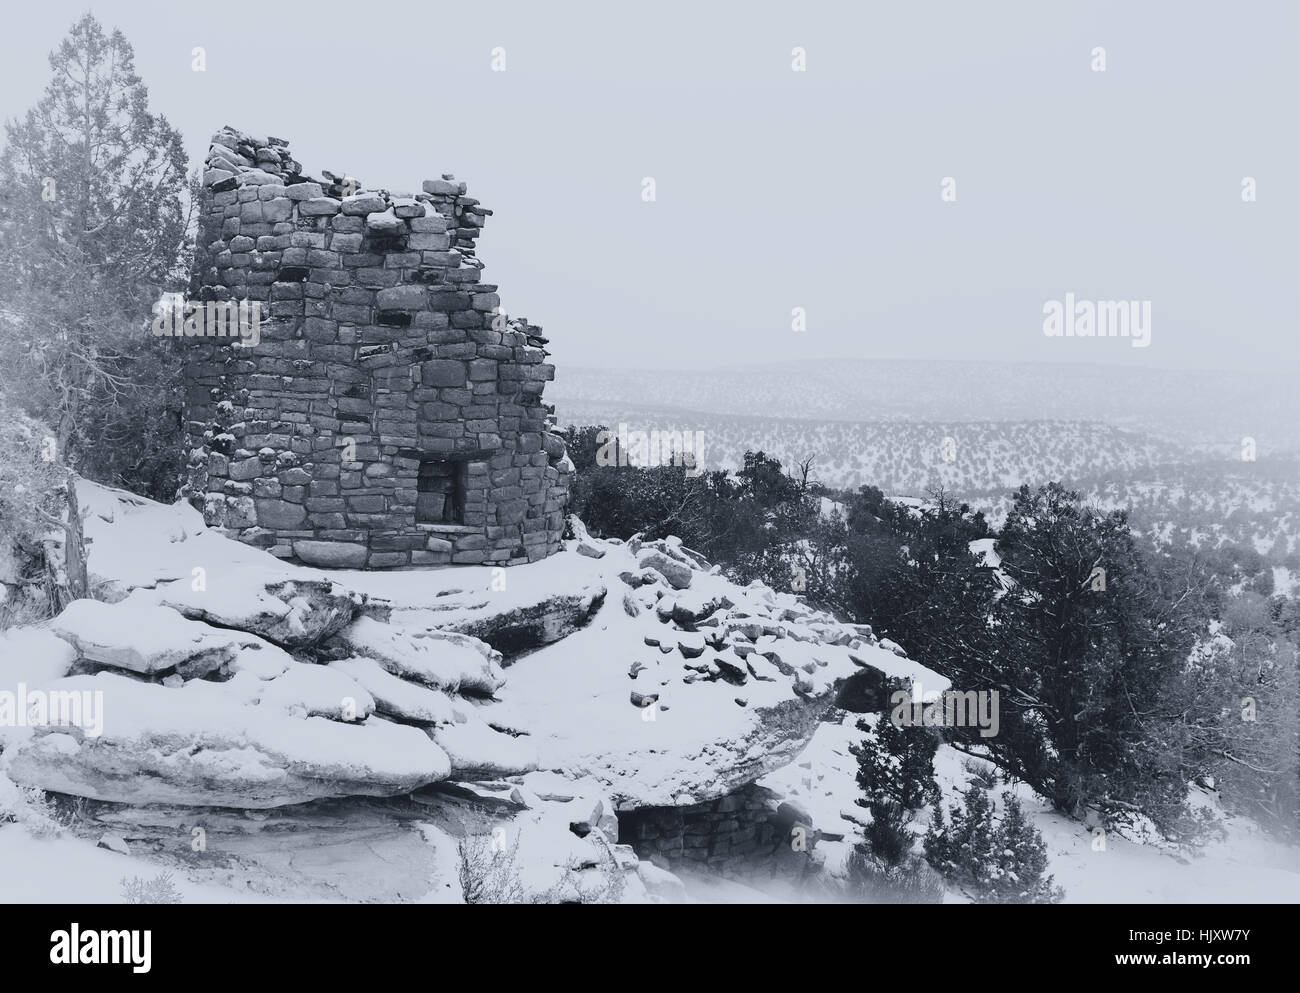 Painted Hand Tower, an Anasazi ruin, overlooking Hovenweep Canyon during a snow storm. Black and white photograph. Stock Photo